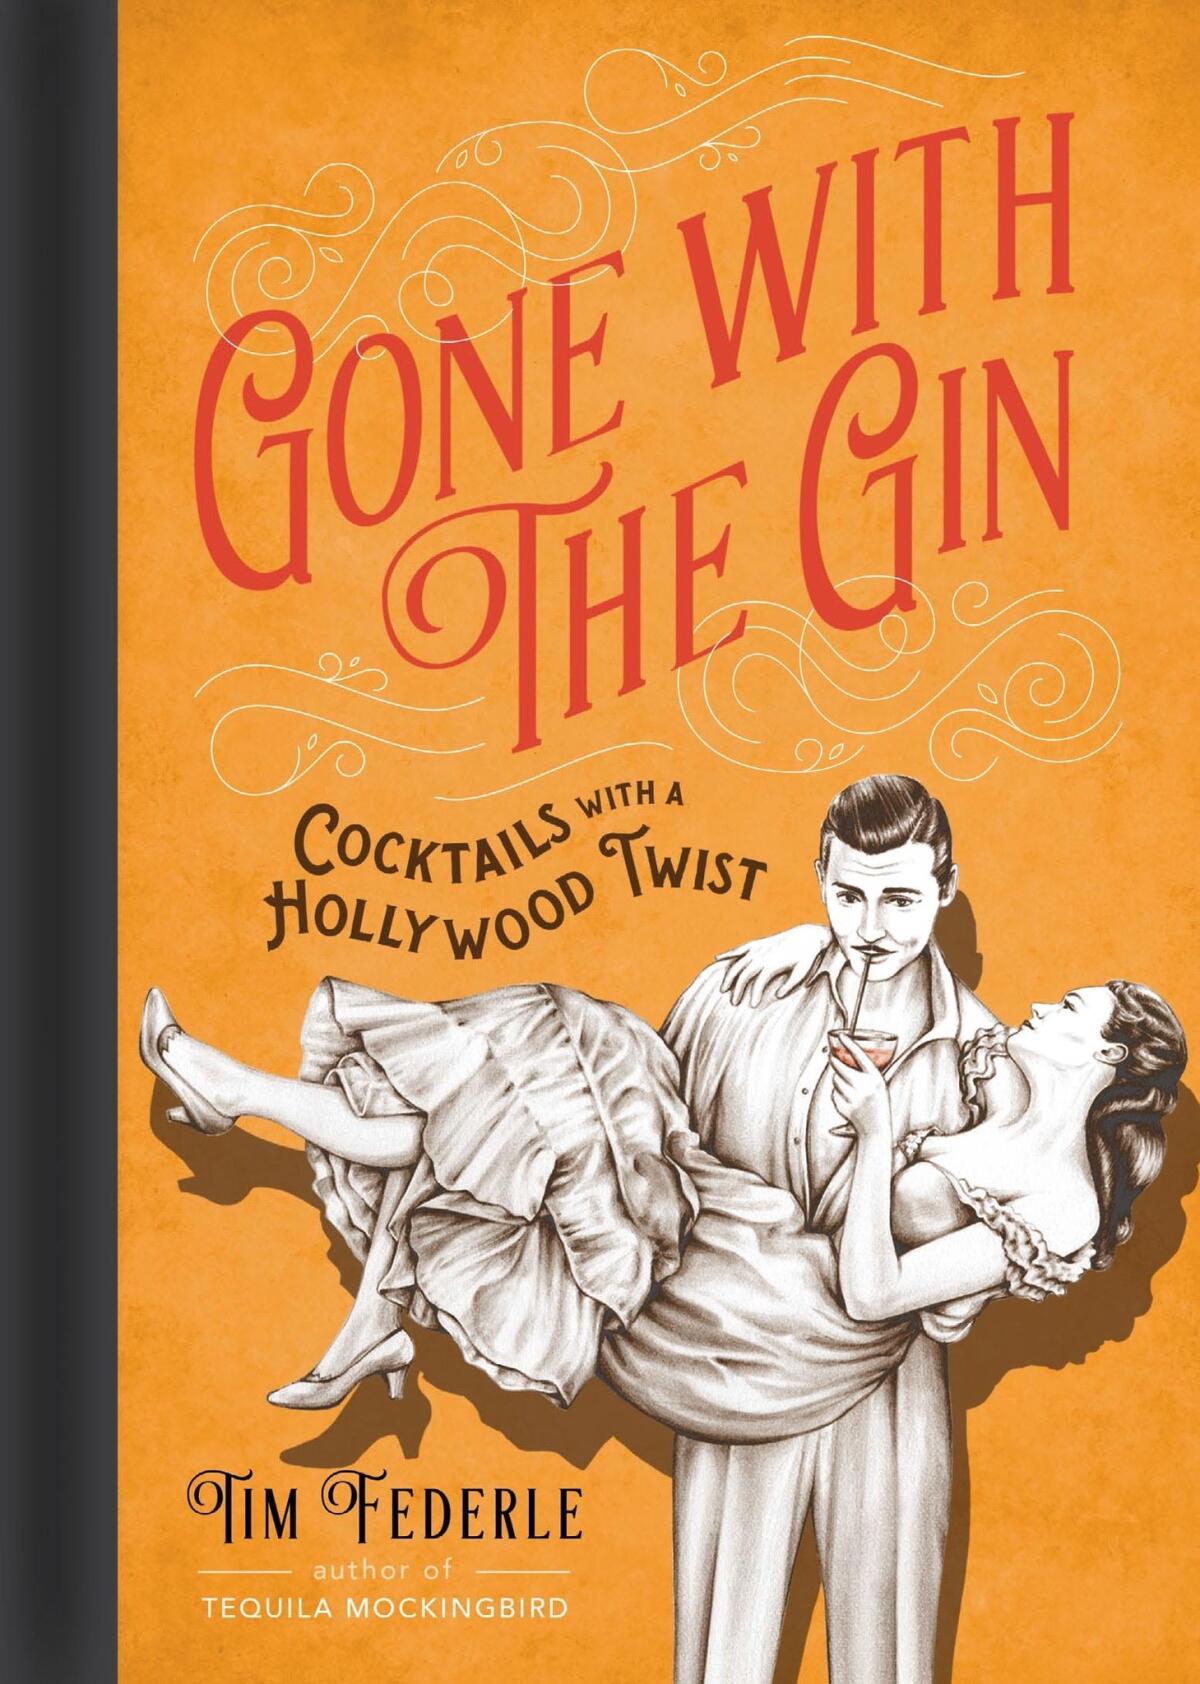 "Gone With the Gin: Cocktails With a Hollywood Twist" by Tim Federle